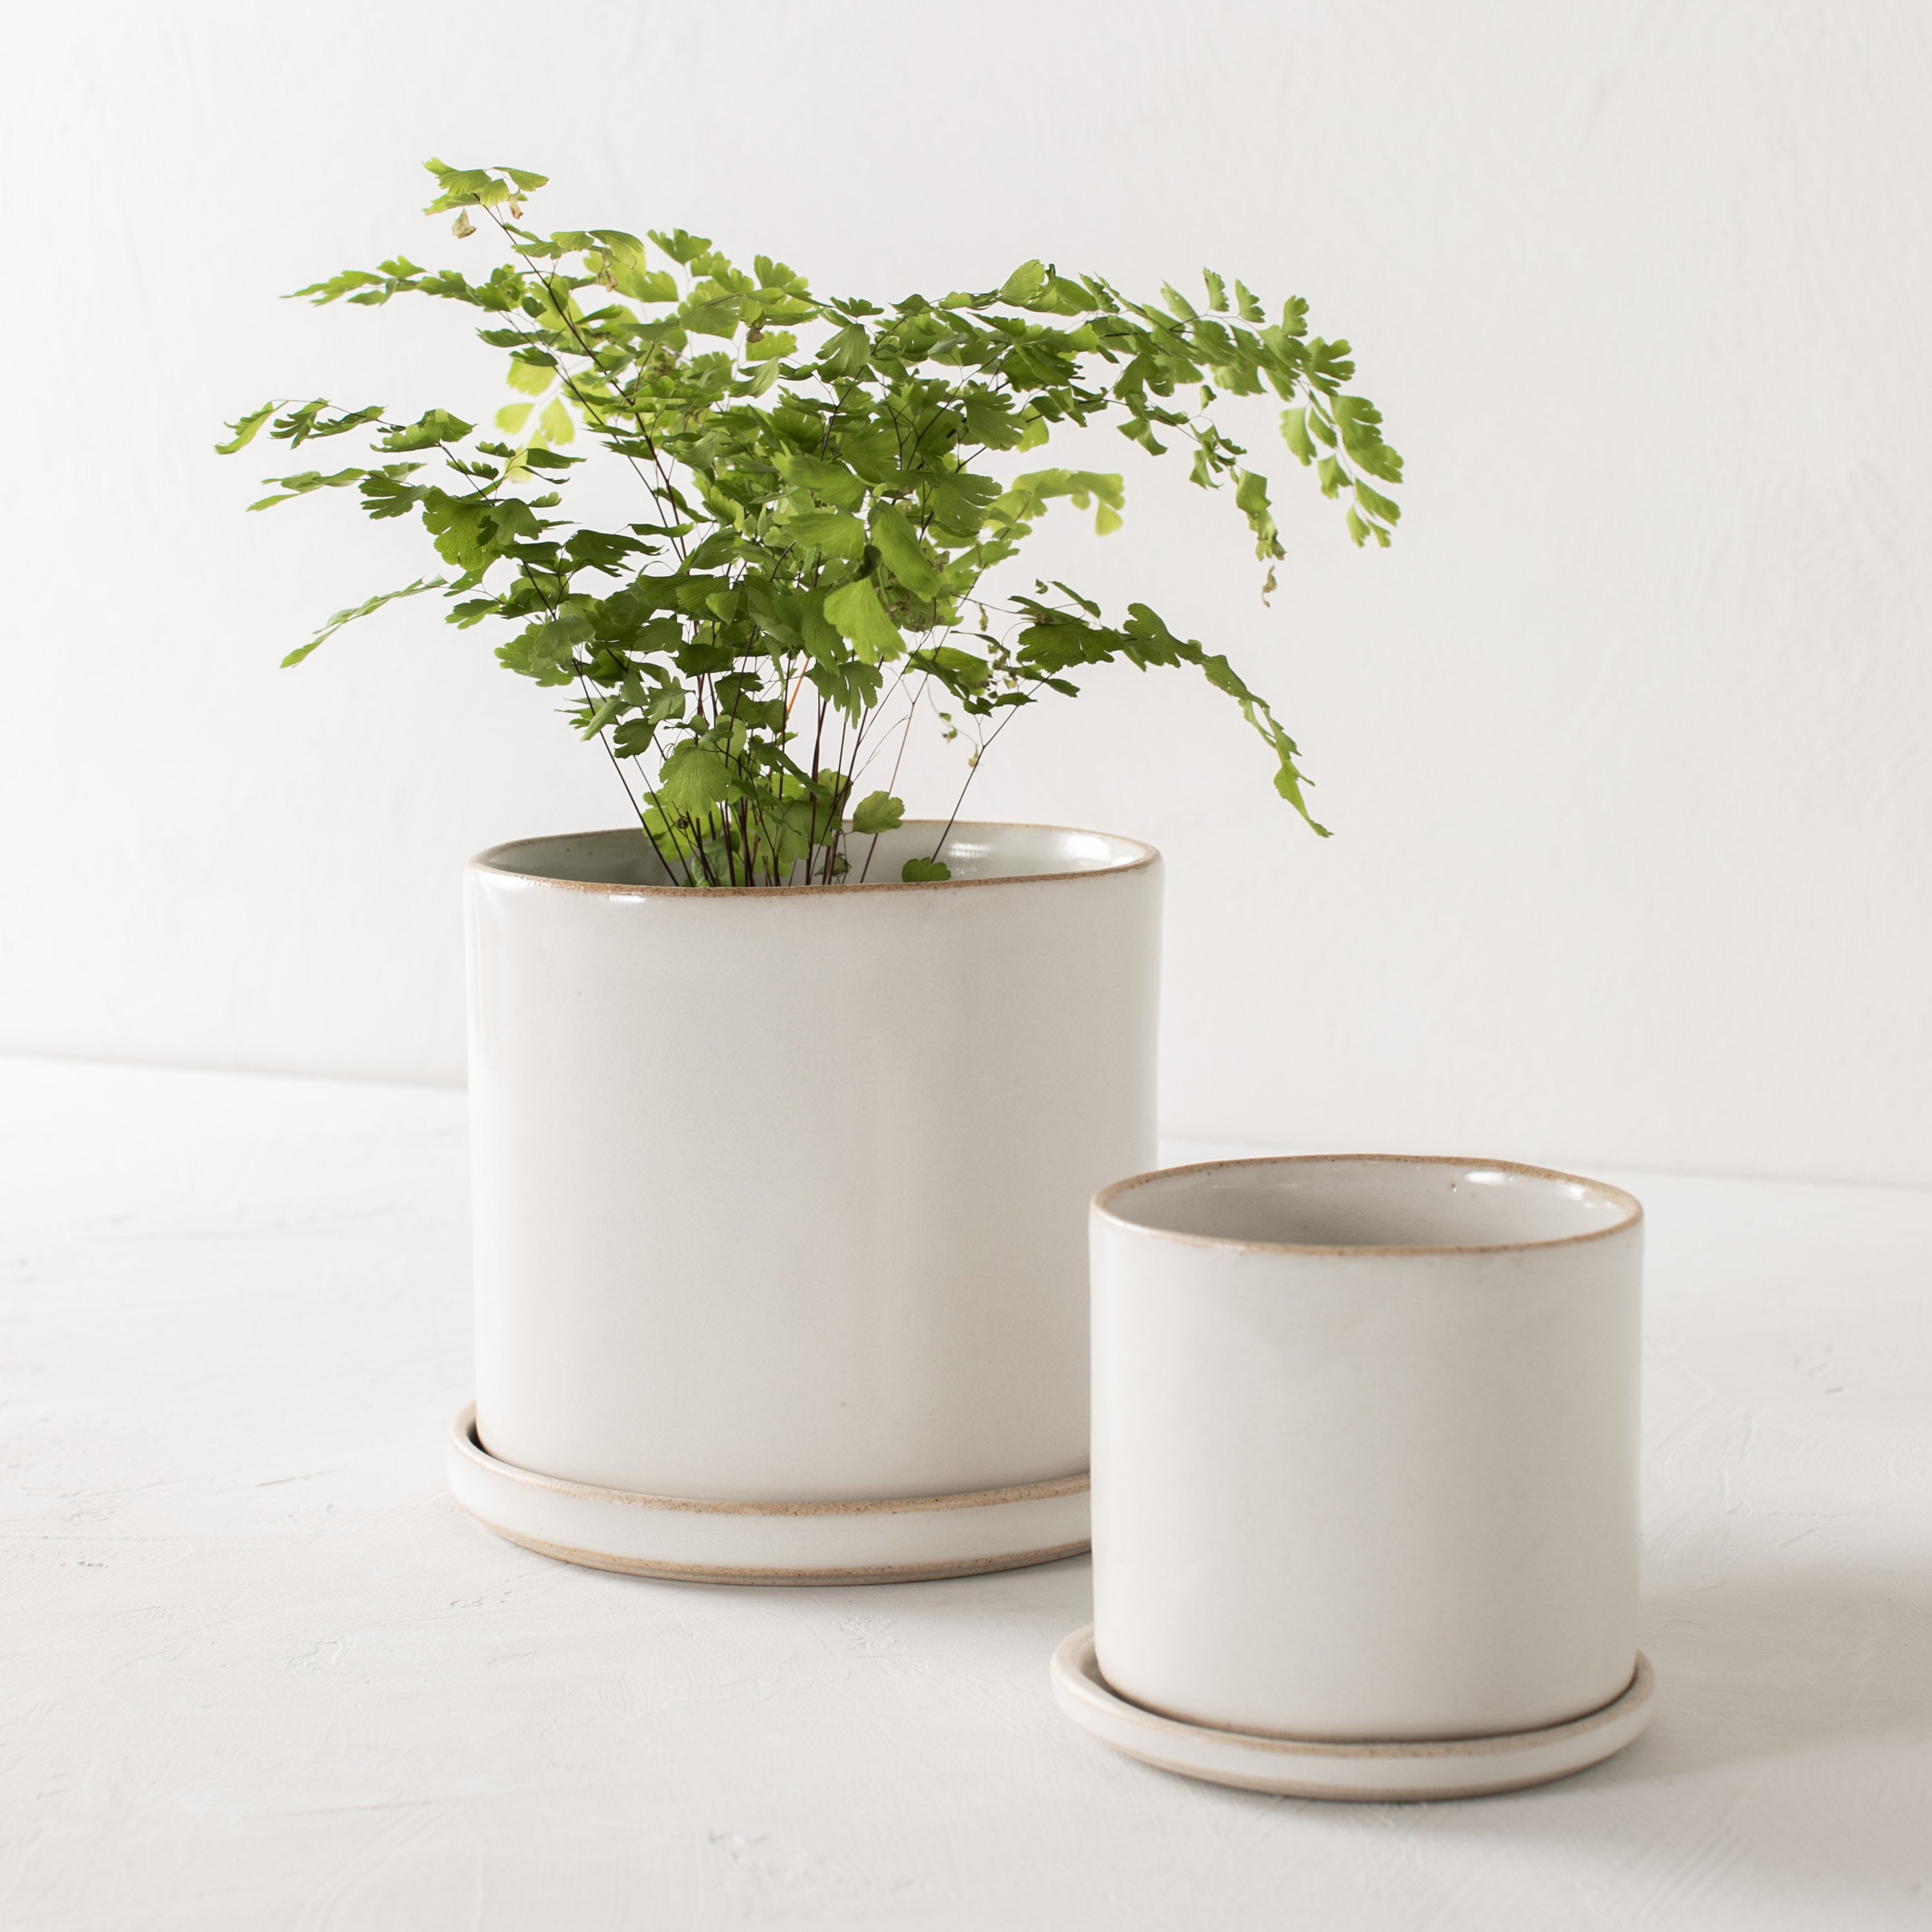 Two minimal ceramic planter close up. One larger and smaller, planters have an exposed stoneware rim and base. Larger planter has a plant inside. Handmade ceramic planter, designed by Convivial Production, sold by Shop Verdant, Kansas City, Mo plant store.